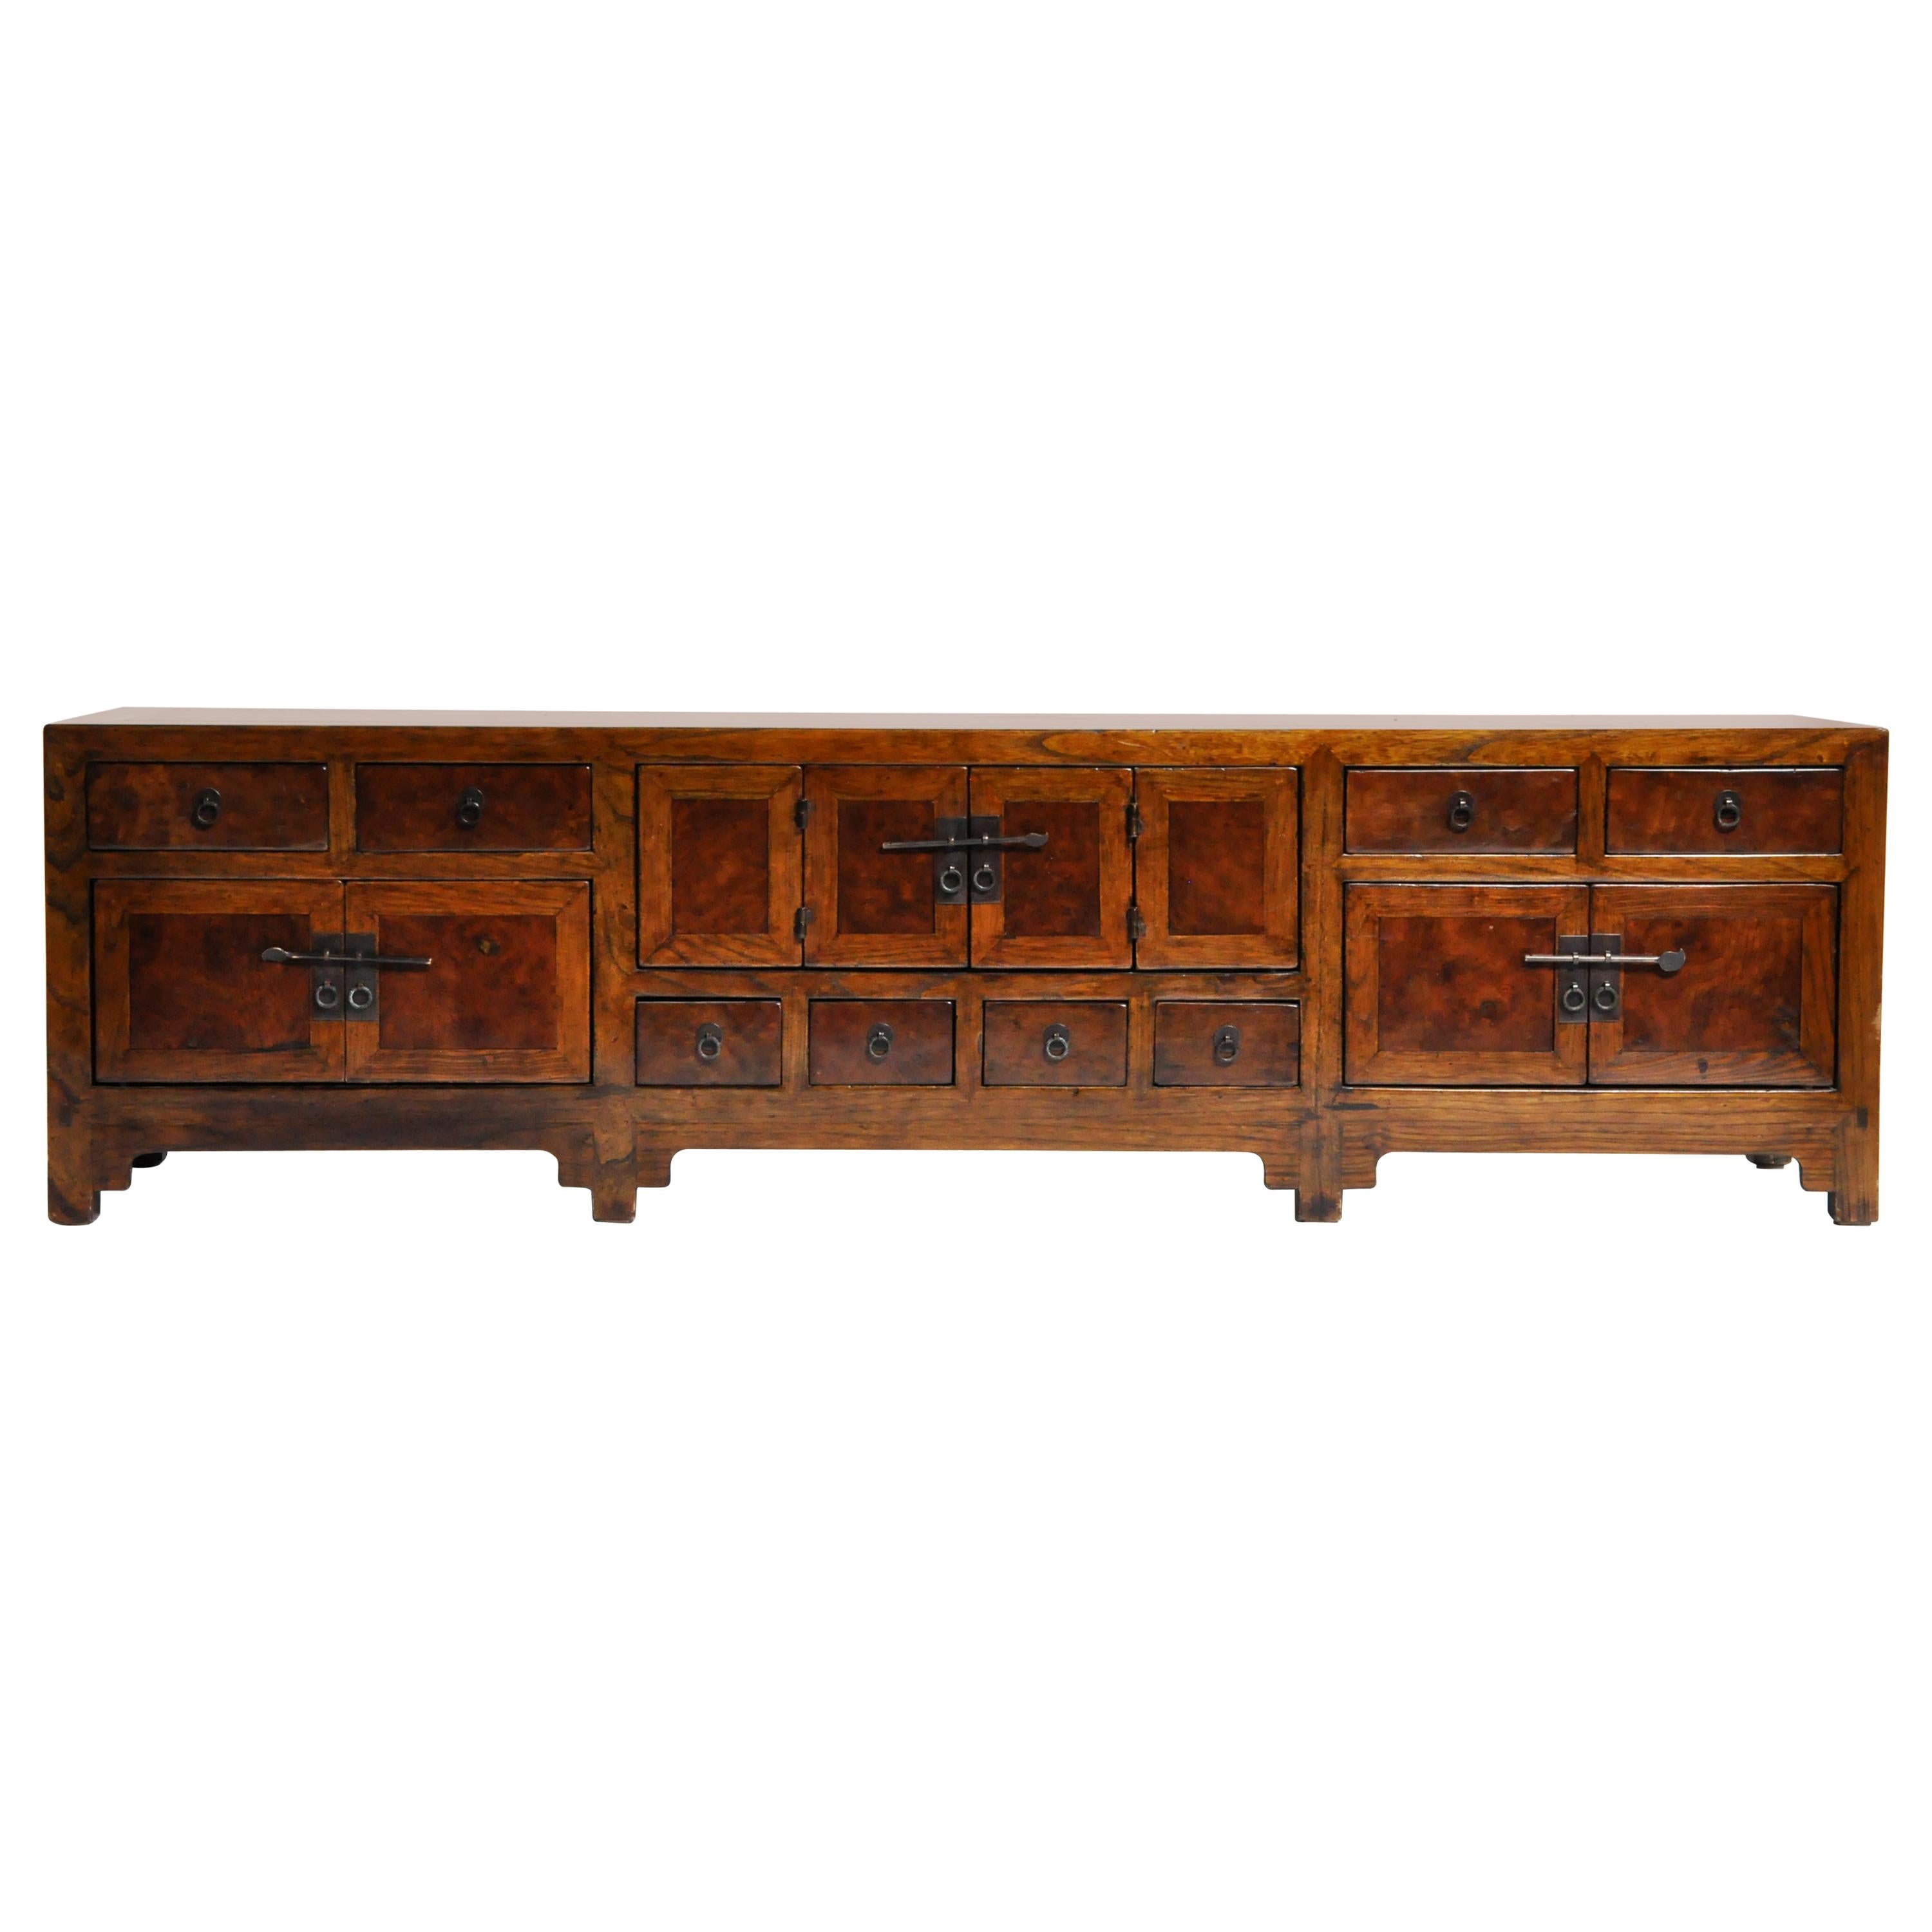 19th Century Chinese Kwang Chest with 8 Drawers